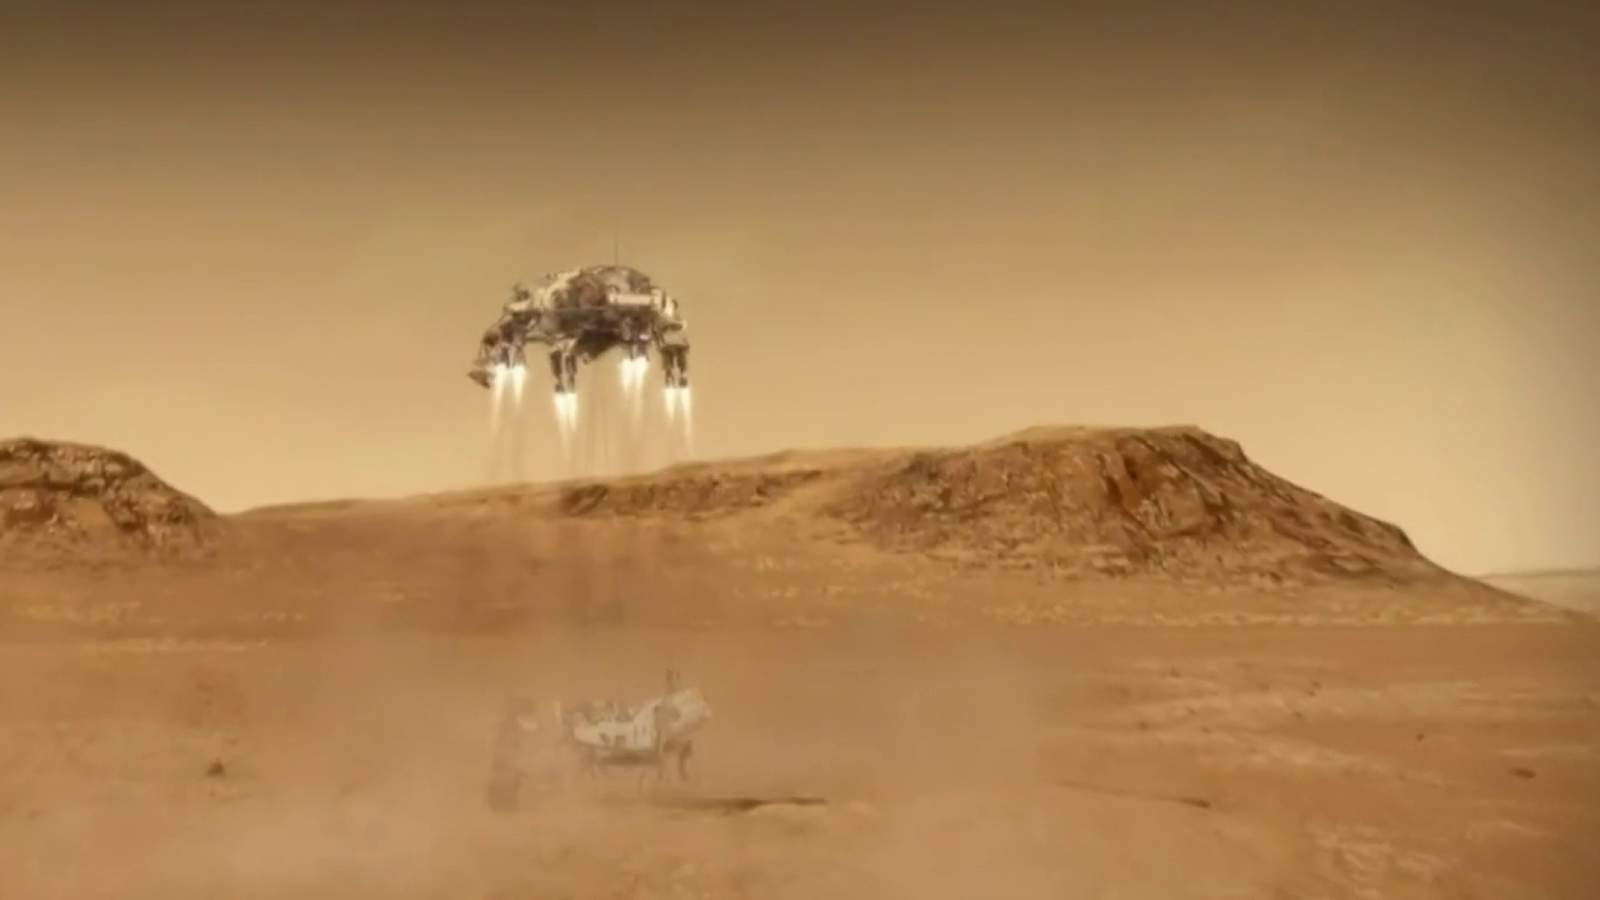 Here’s how NASA’s Perseverance rover will try to land on Mars